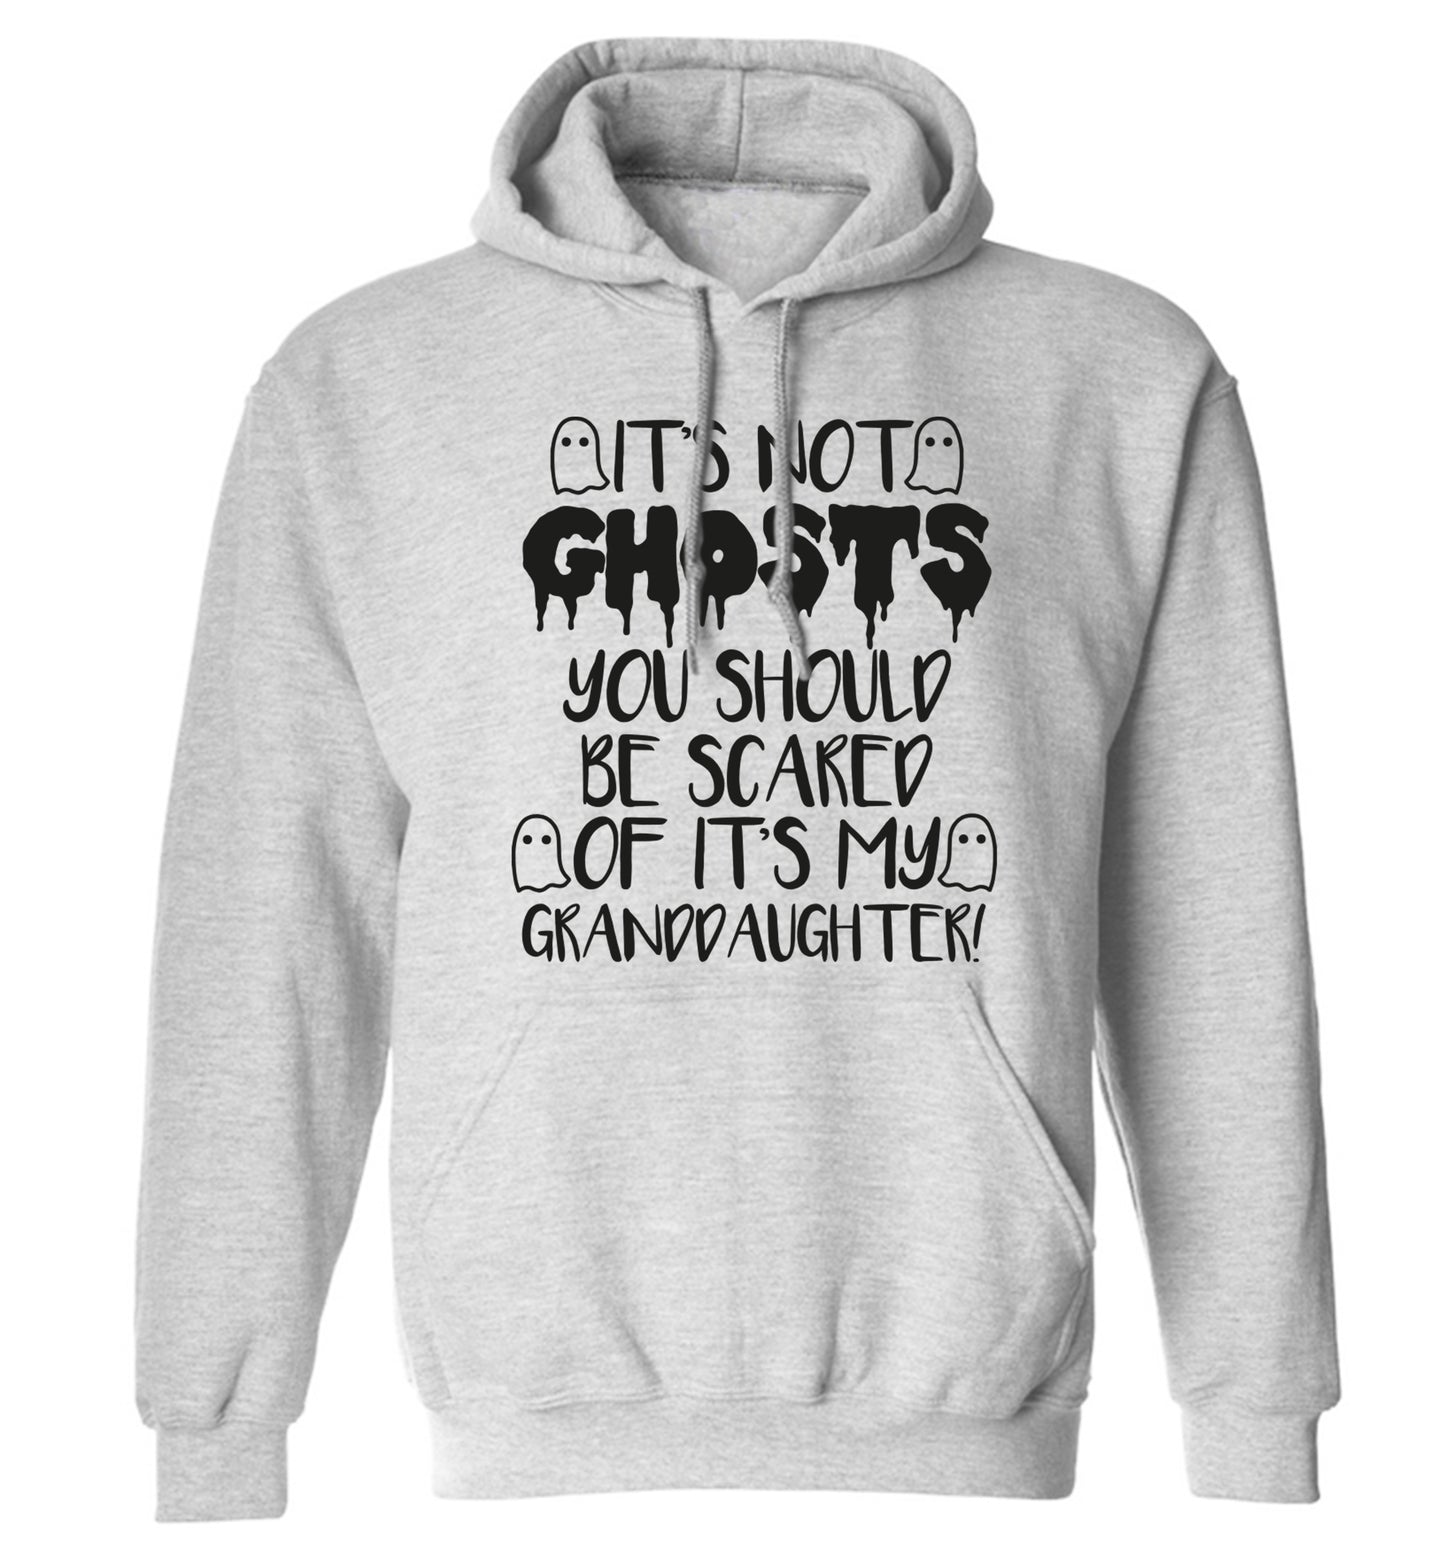 It's not ghosts you should be scared of it's my granddaughter! adults unisex grey hoodie 2XL